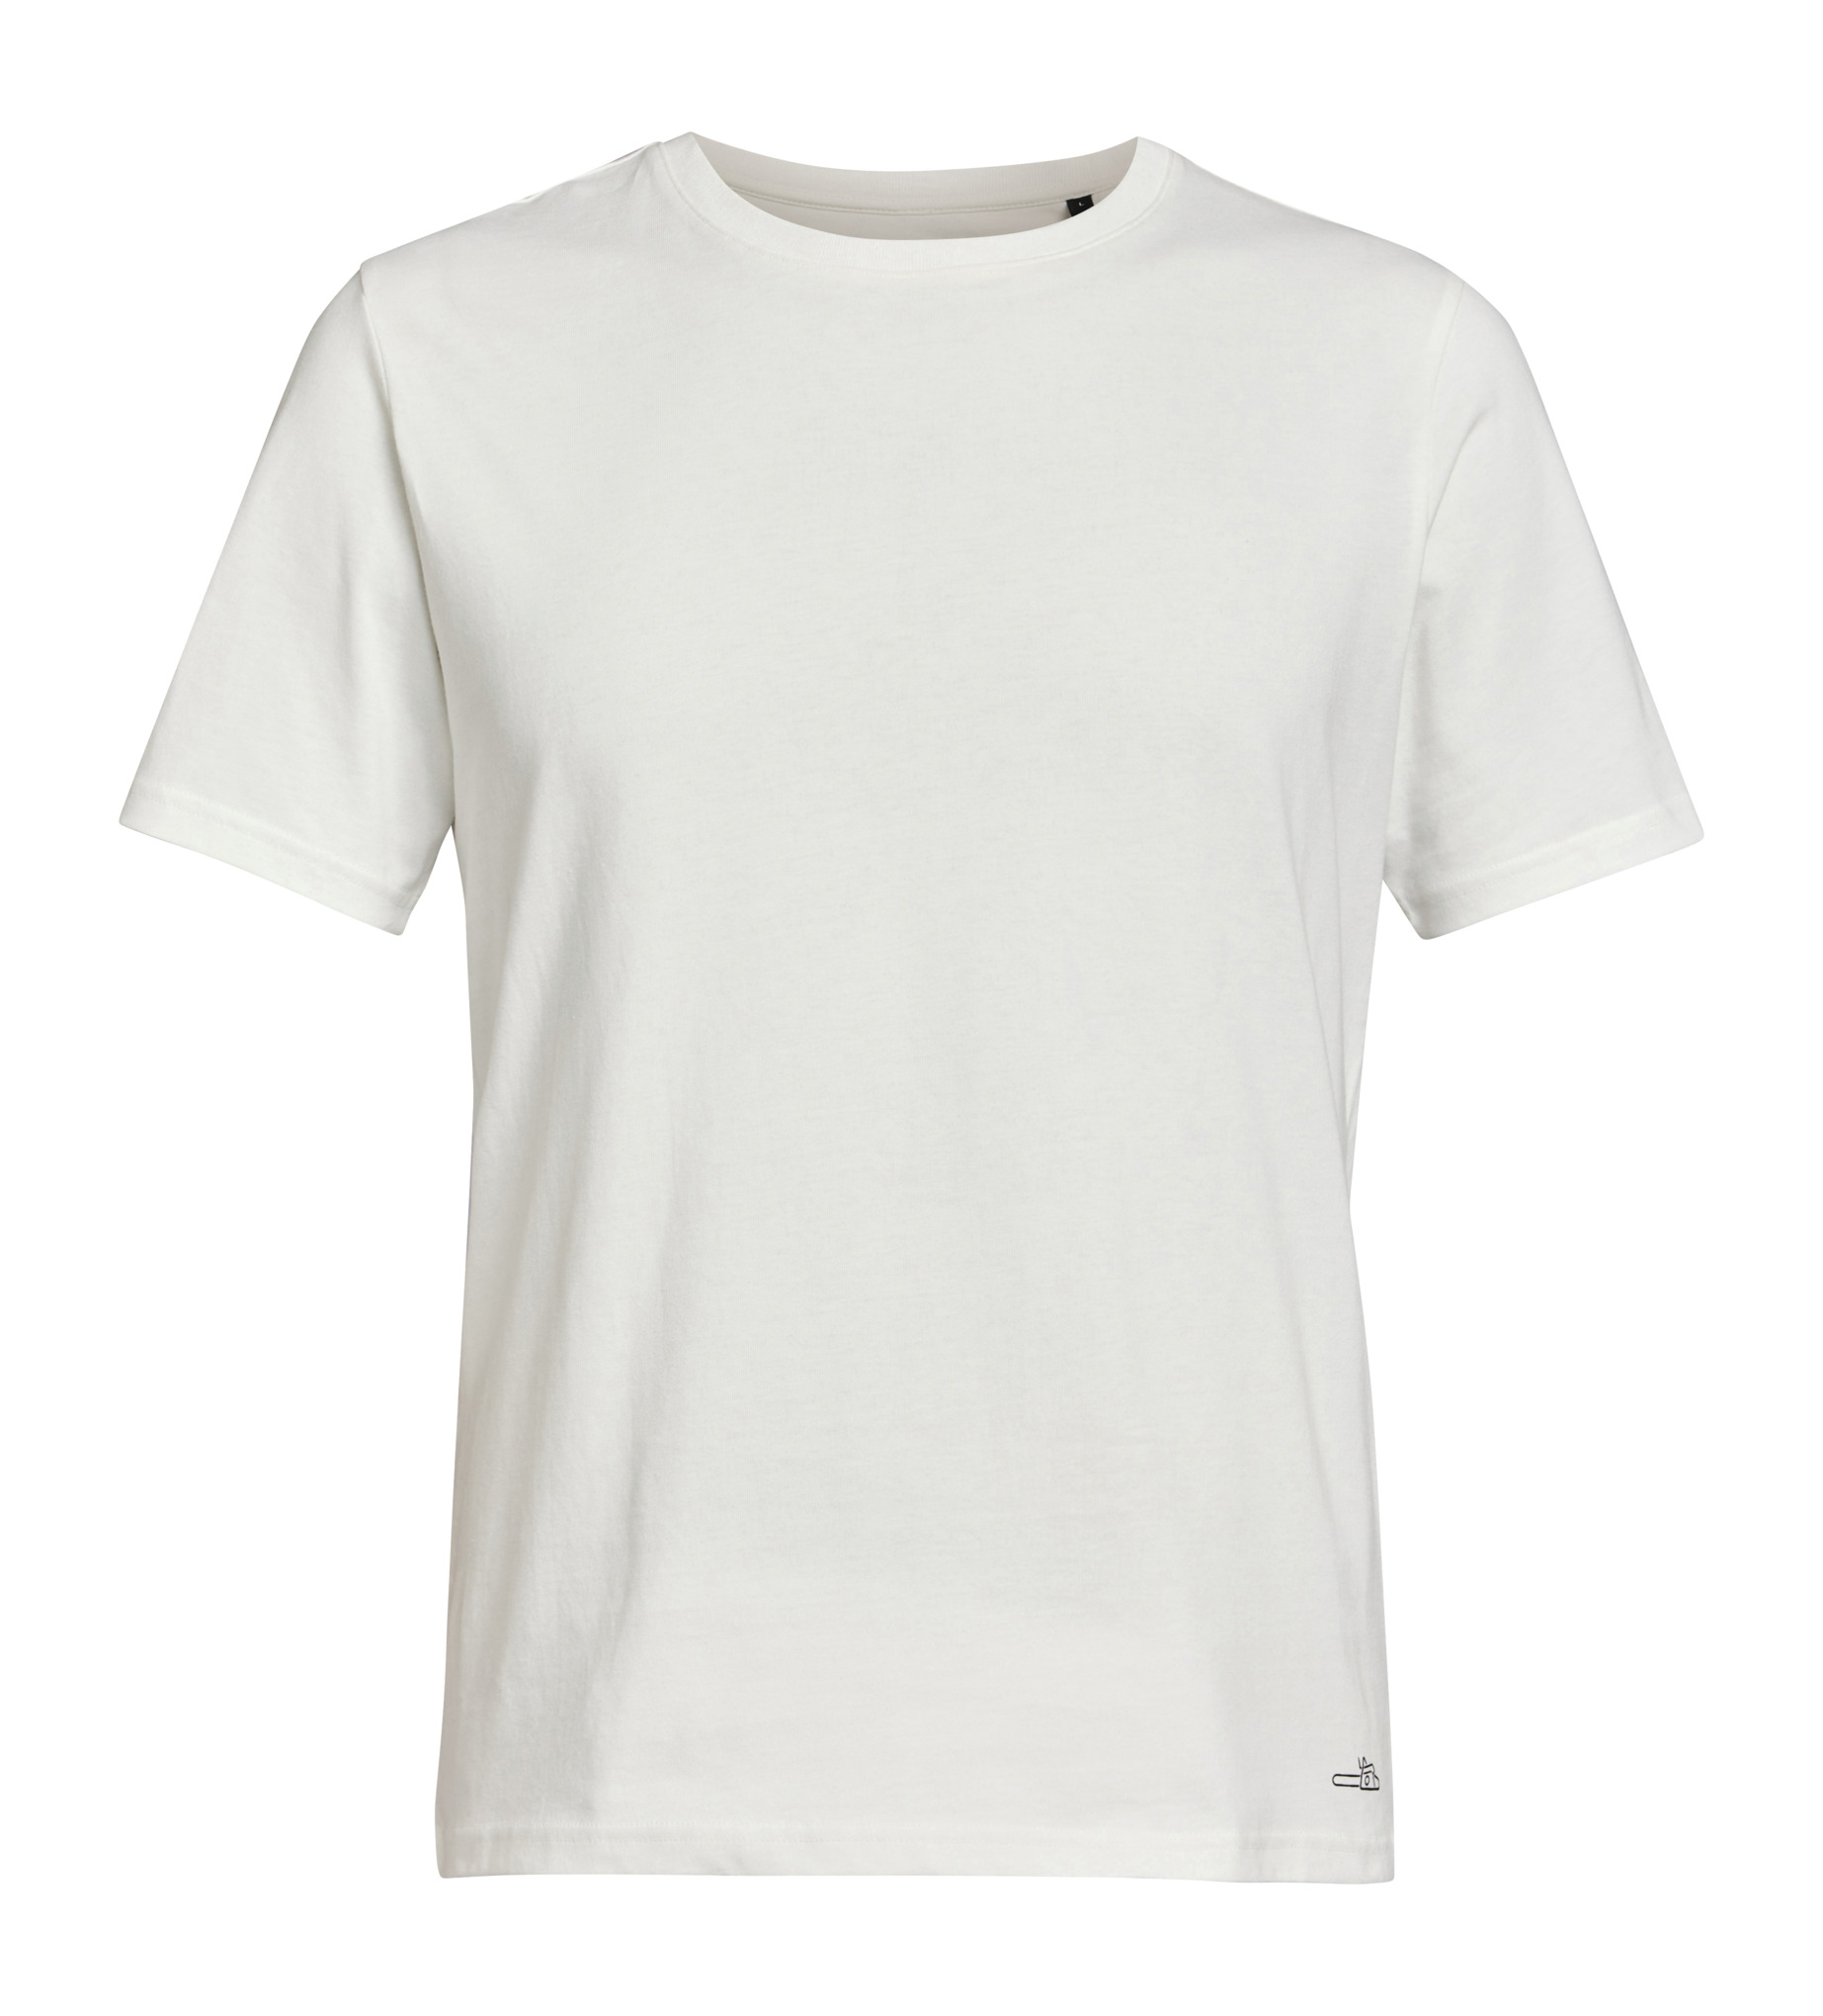 T-Shirt SUSTAINABLE ICON Branca, Compre online